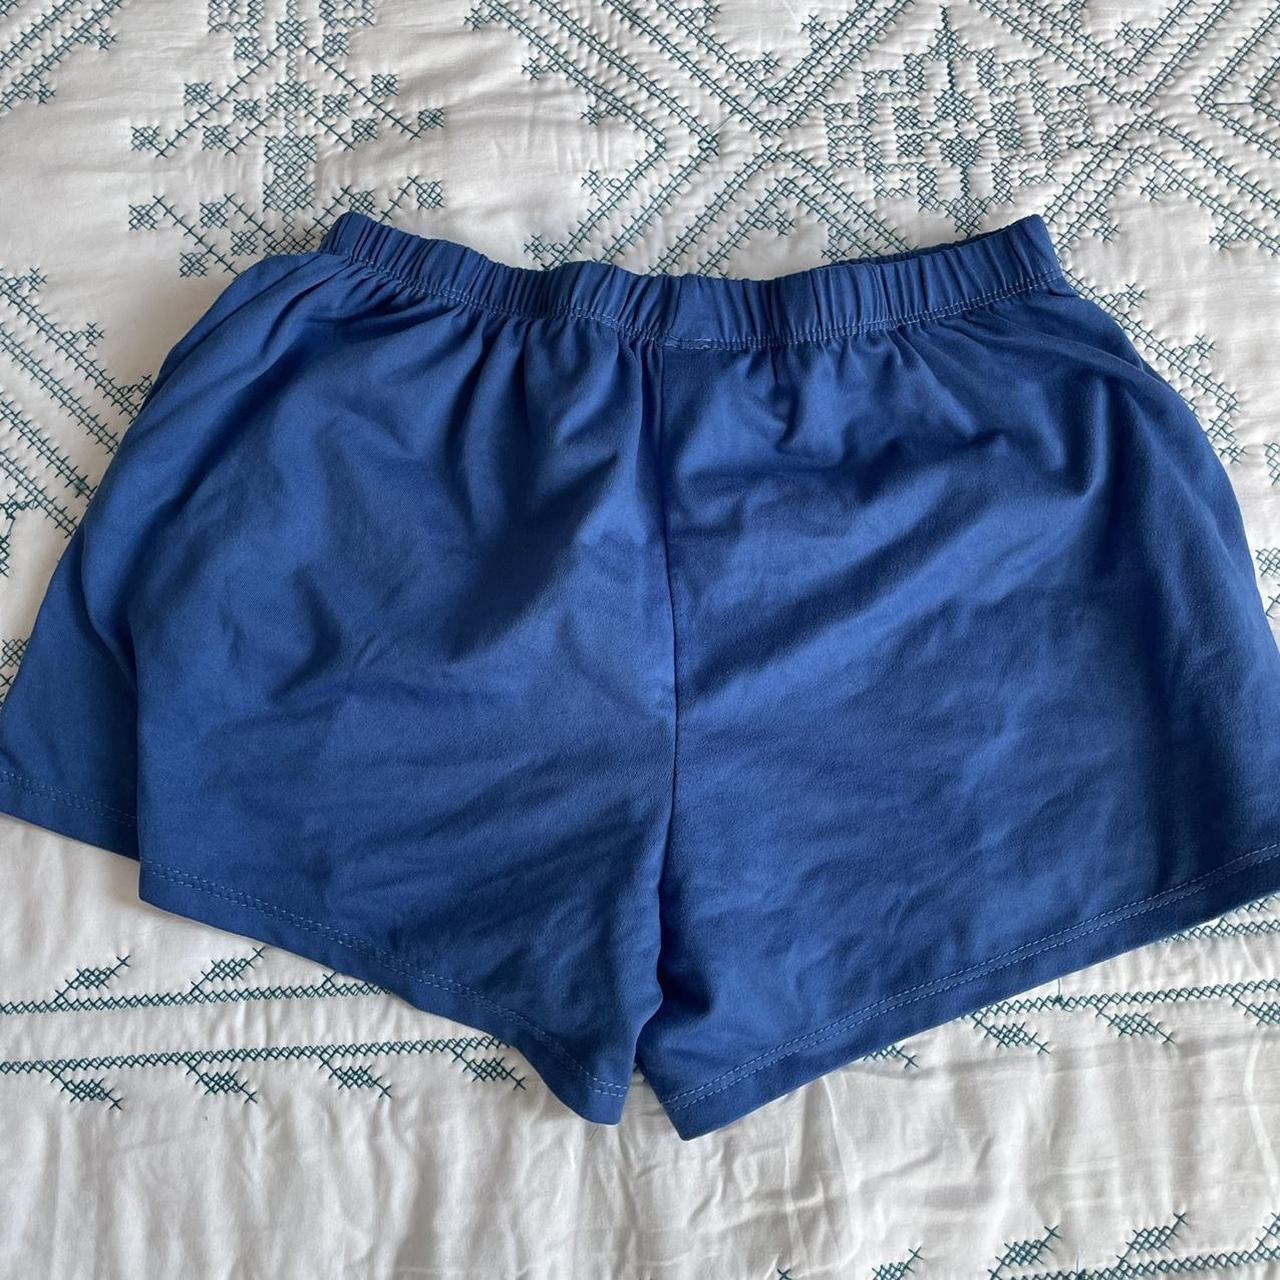 Product Image 3 - Blue pj shorts with pockets